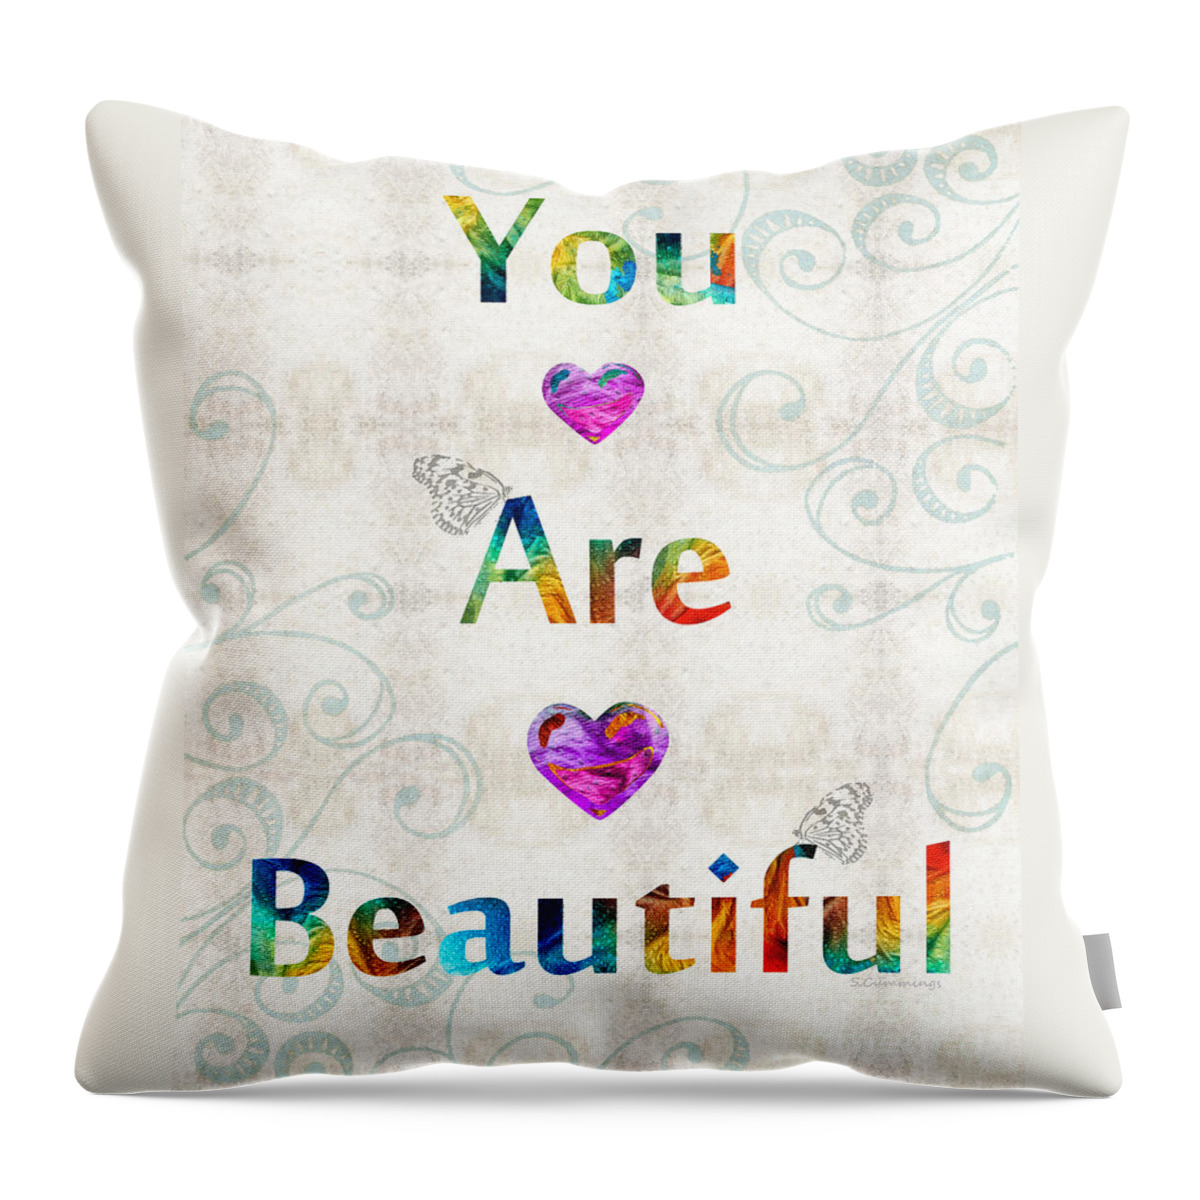 Uplifting Throw Pillow featuring the painting Uplifting Art - You Are Beautiful by Sharon Cummings by Sharon Cummings